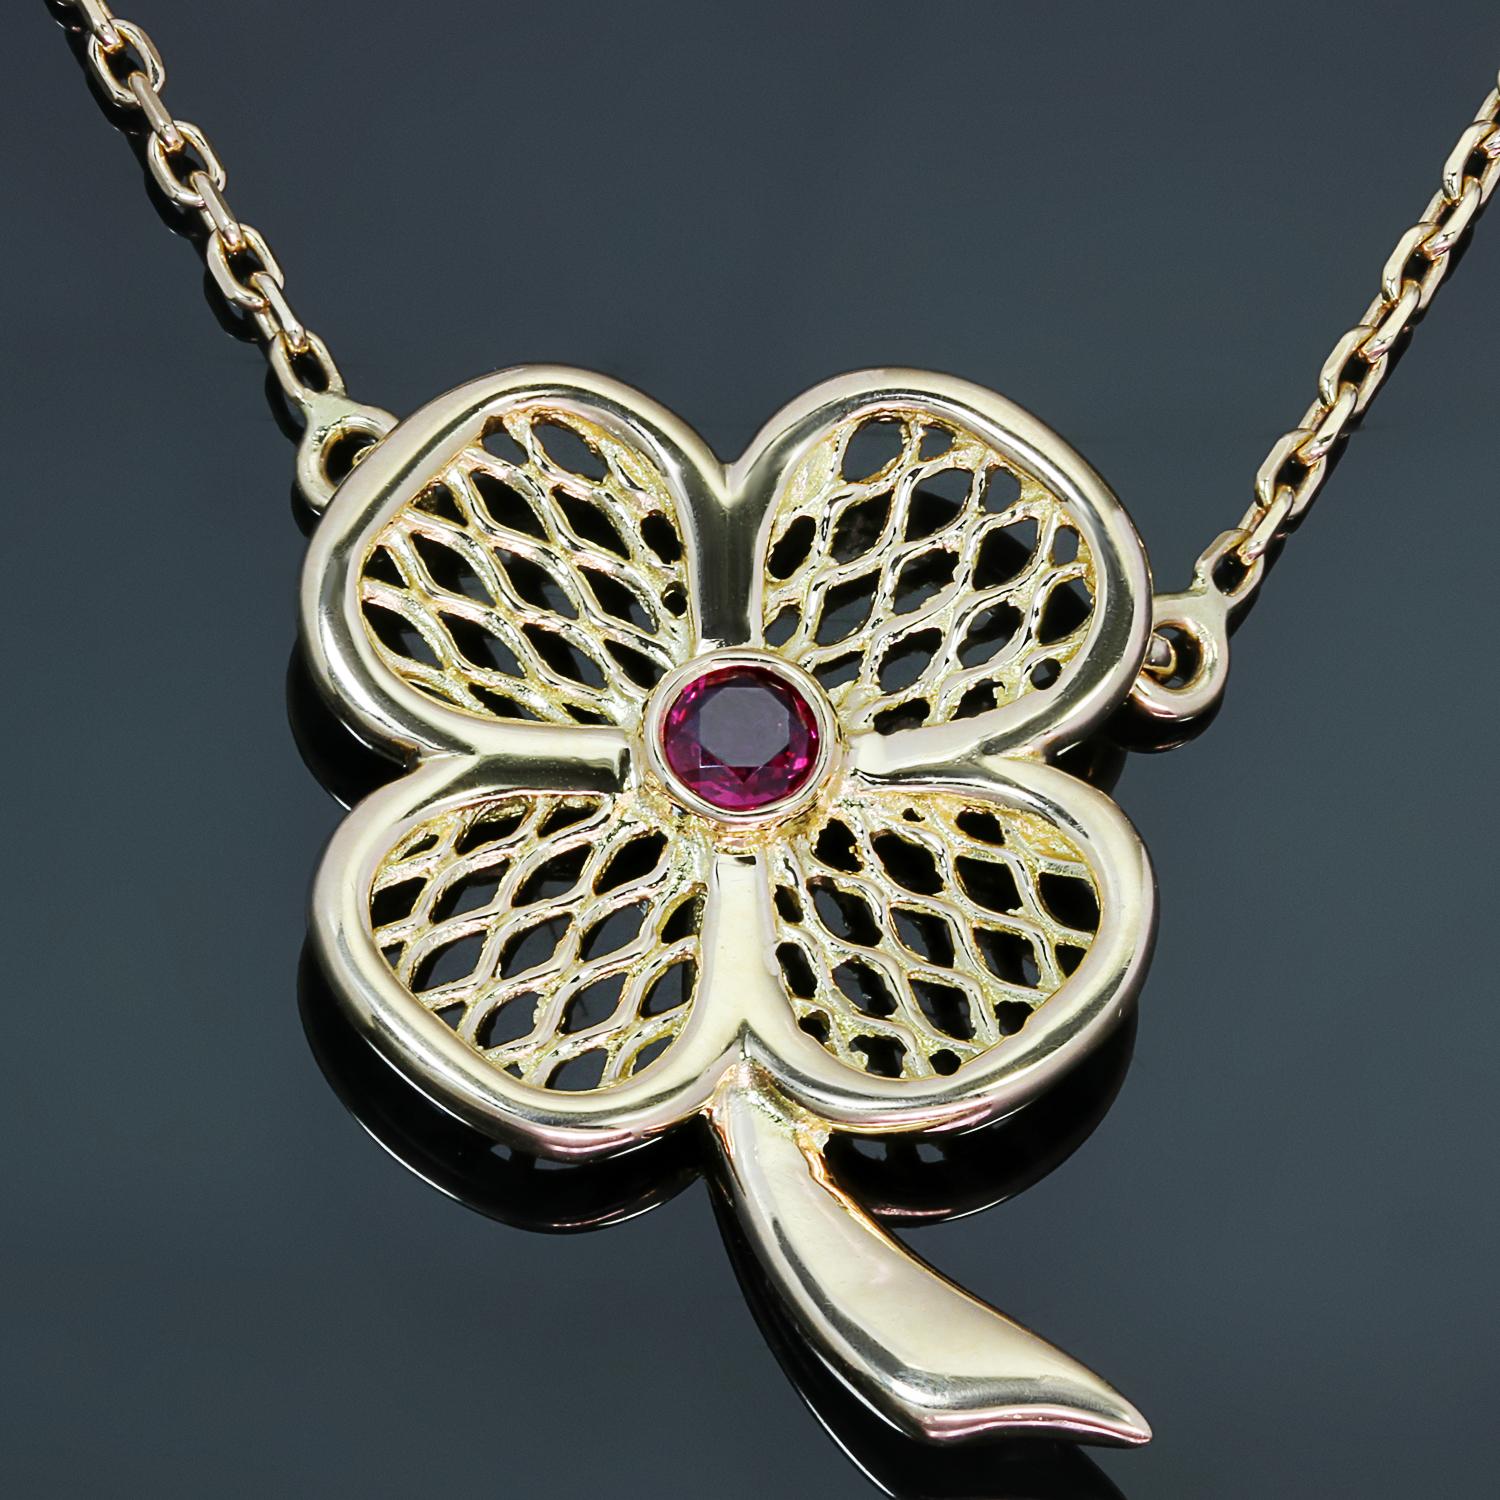 This gorgeous Van Cleef & Arpels necklace features an open lattice 19.0mm x 26.0mm clover flower pendant crafted in 18k yellow gold and set with a round red ruby. Made in France circa 1990s. Measurements: 0.74